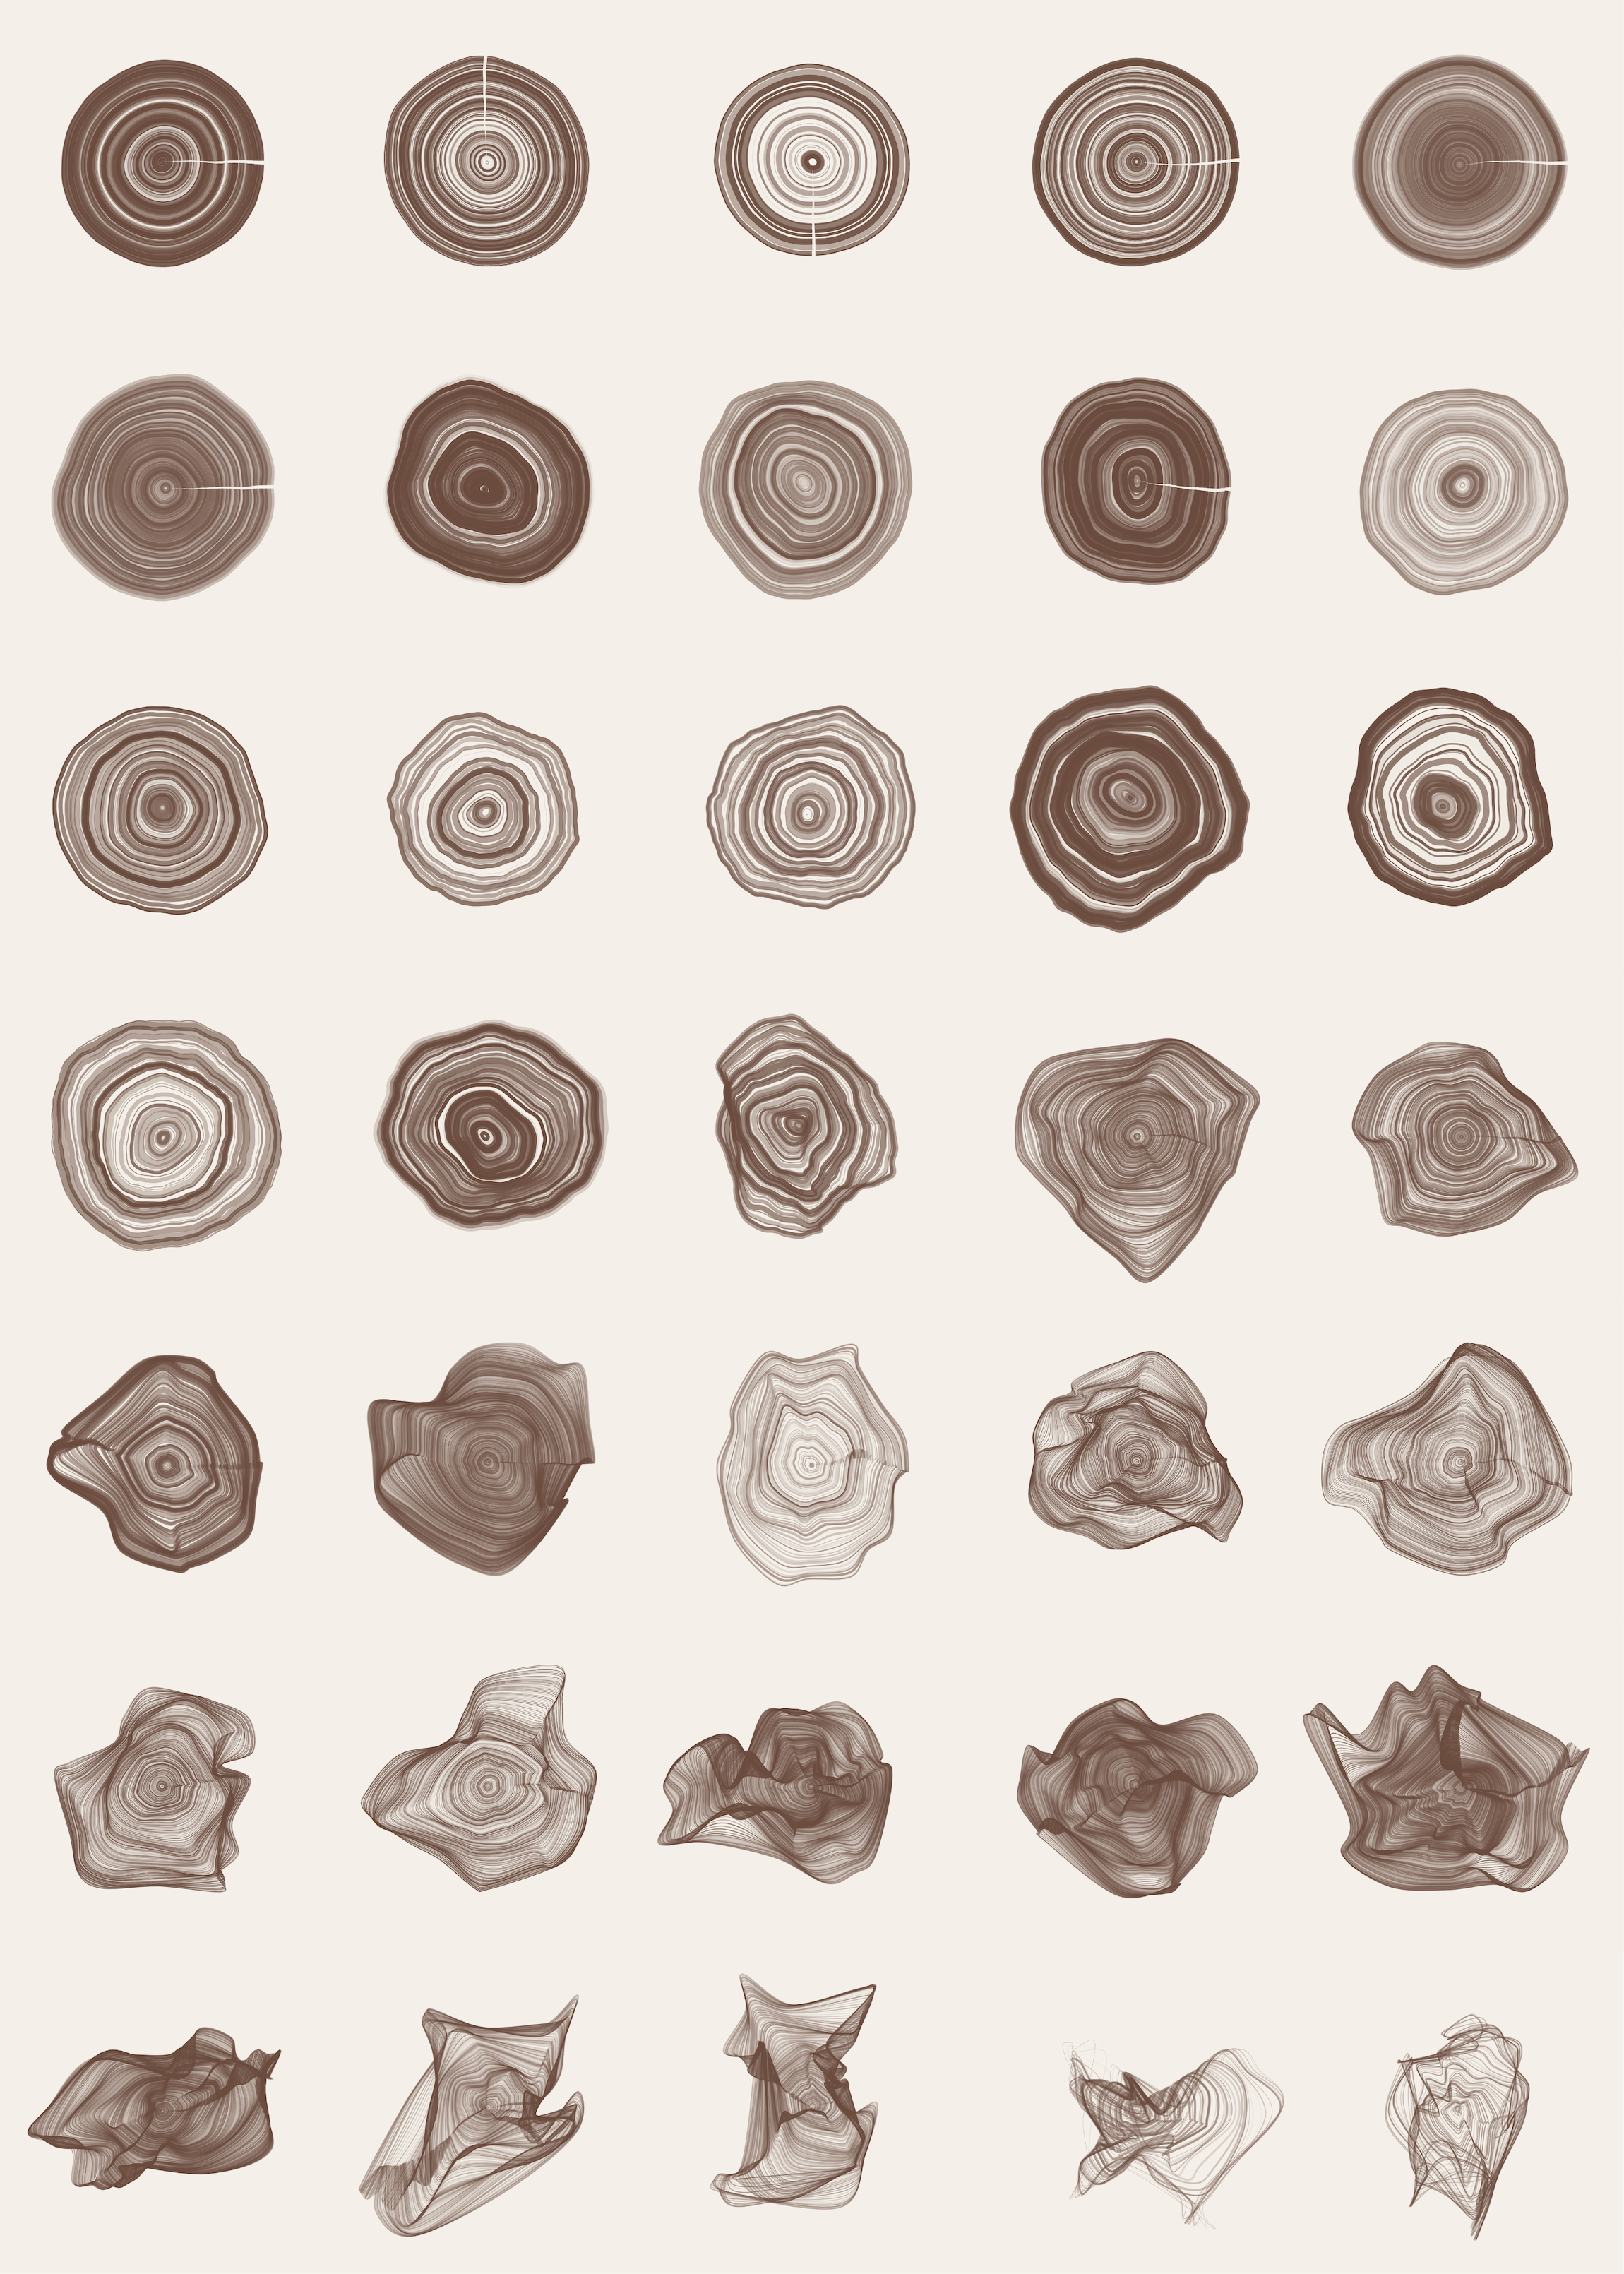 artwork of generated tree rings arranged in a grid